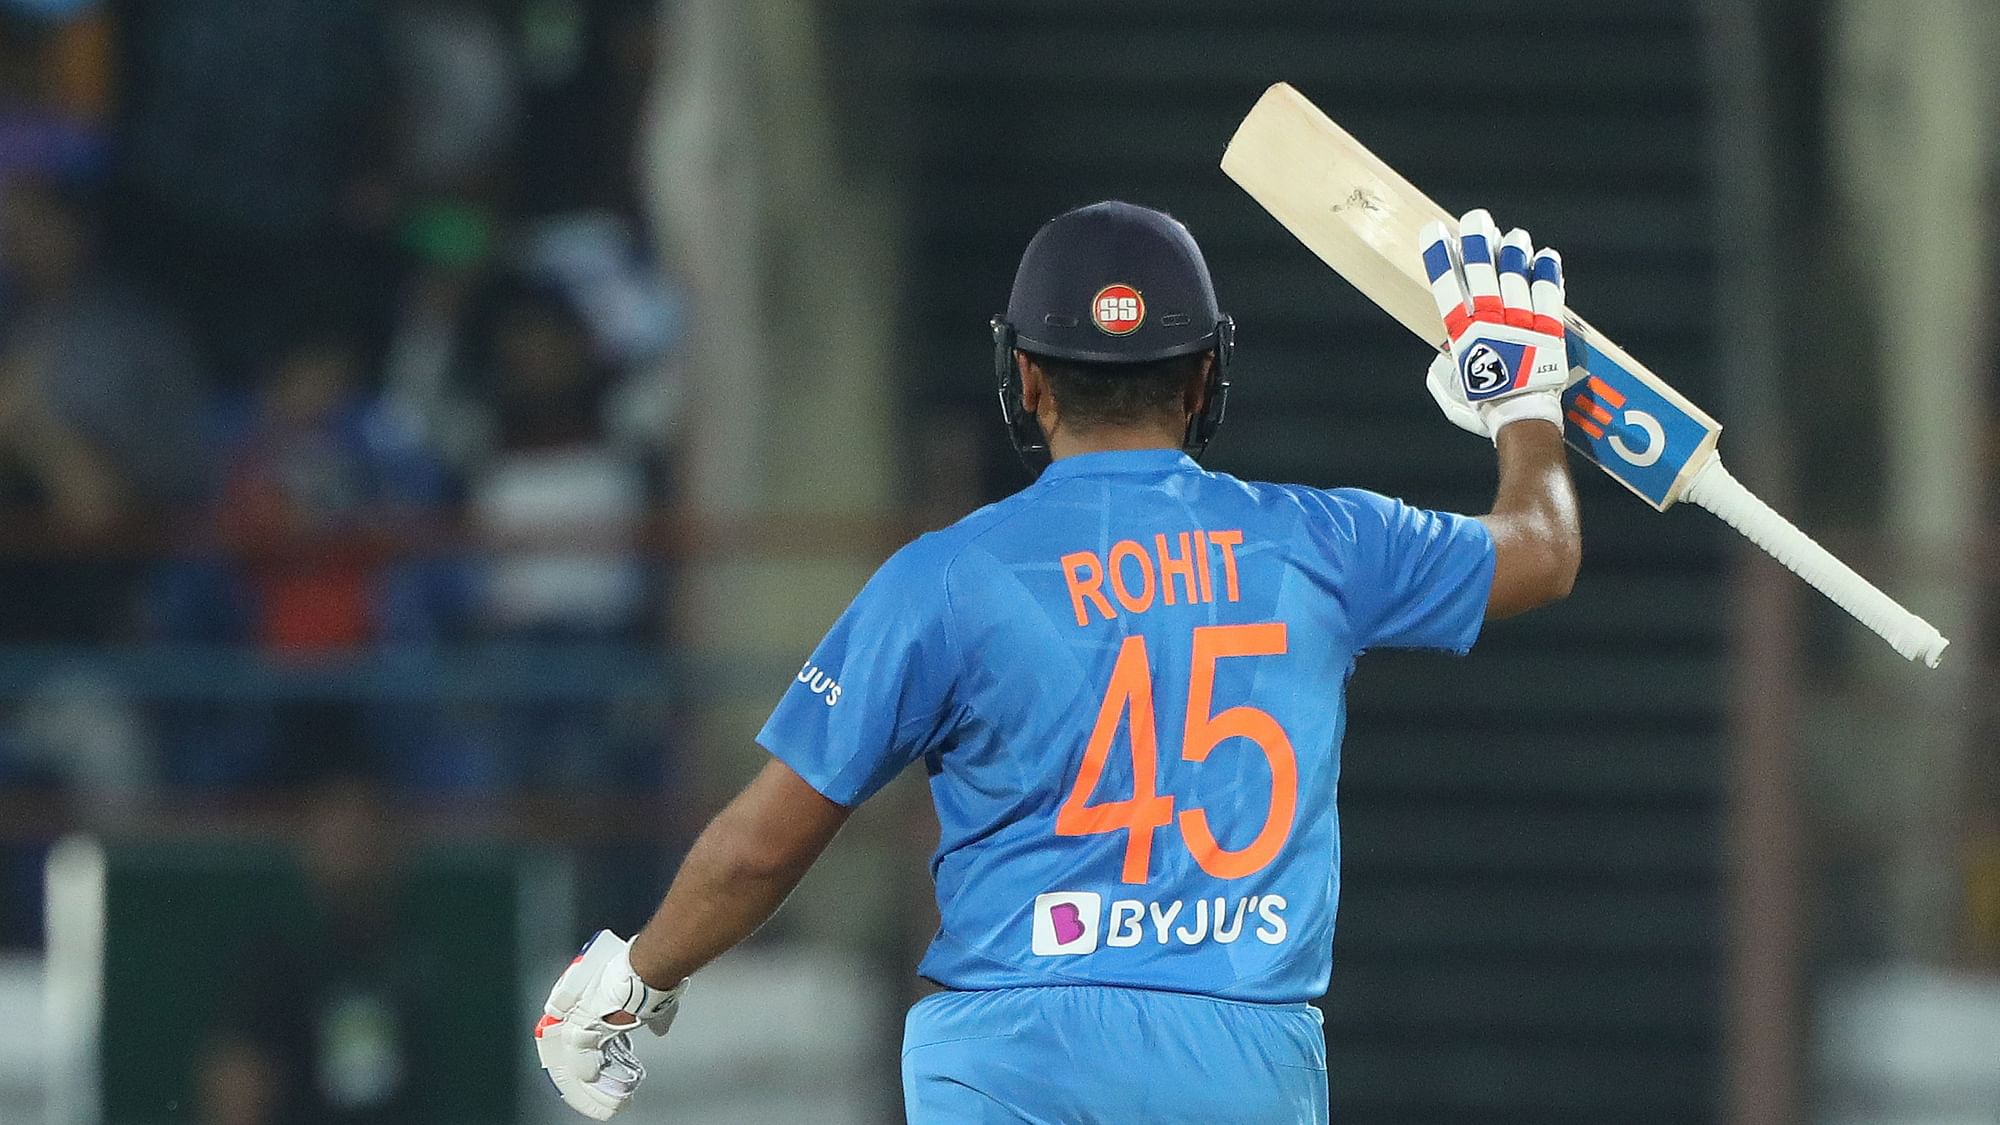 Rohit Sharma scored 85 to help India win the Rajkot T20 by 8 wickets.